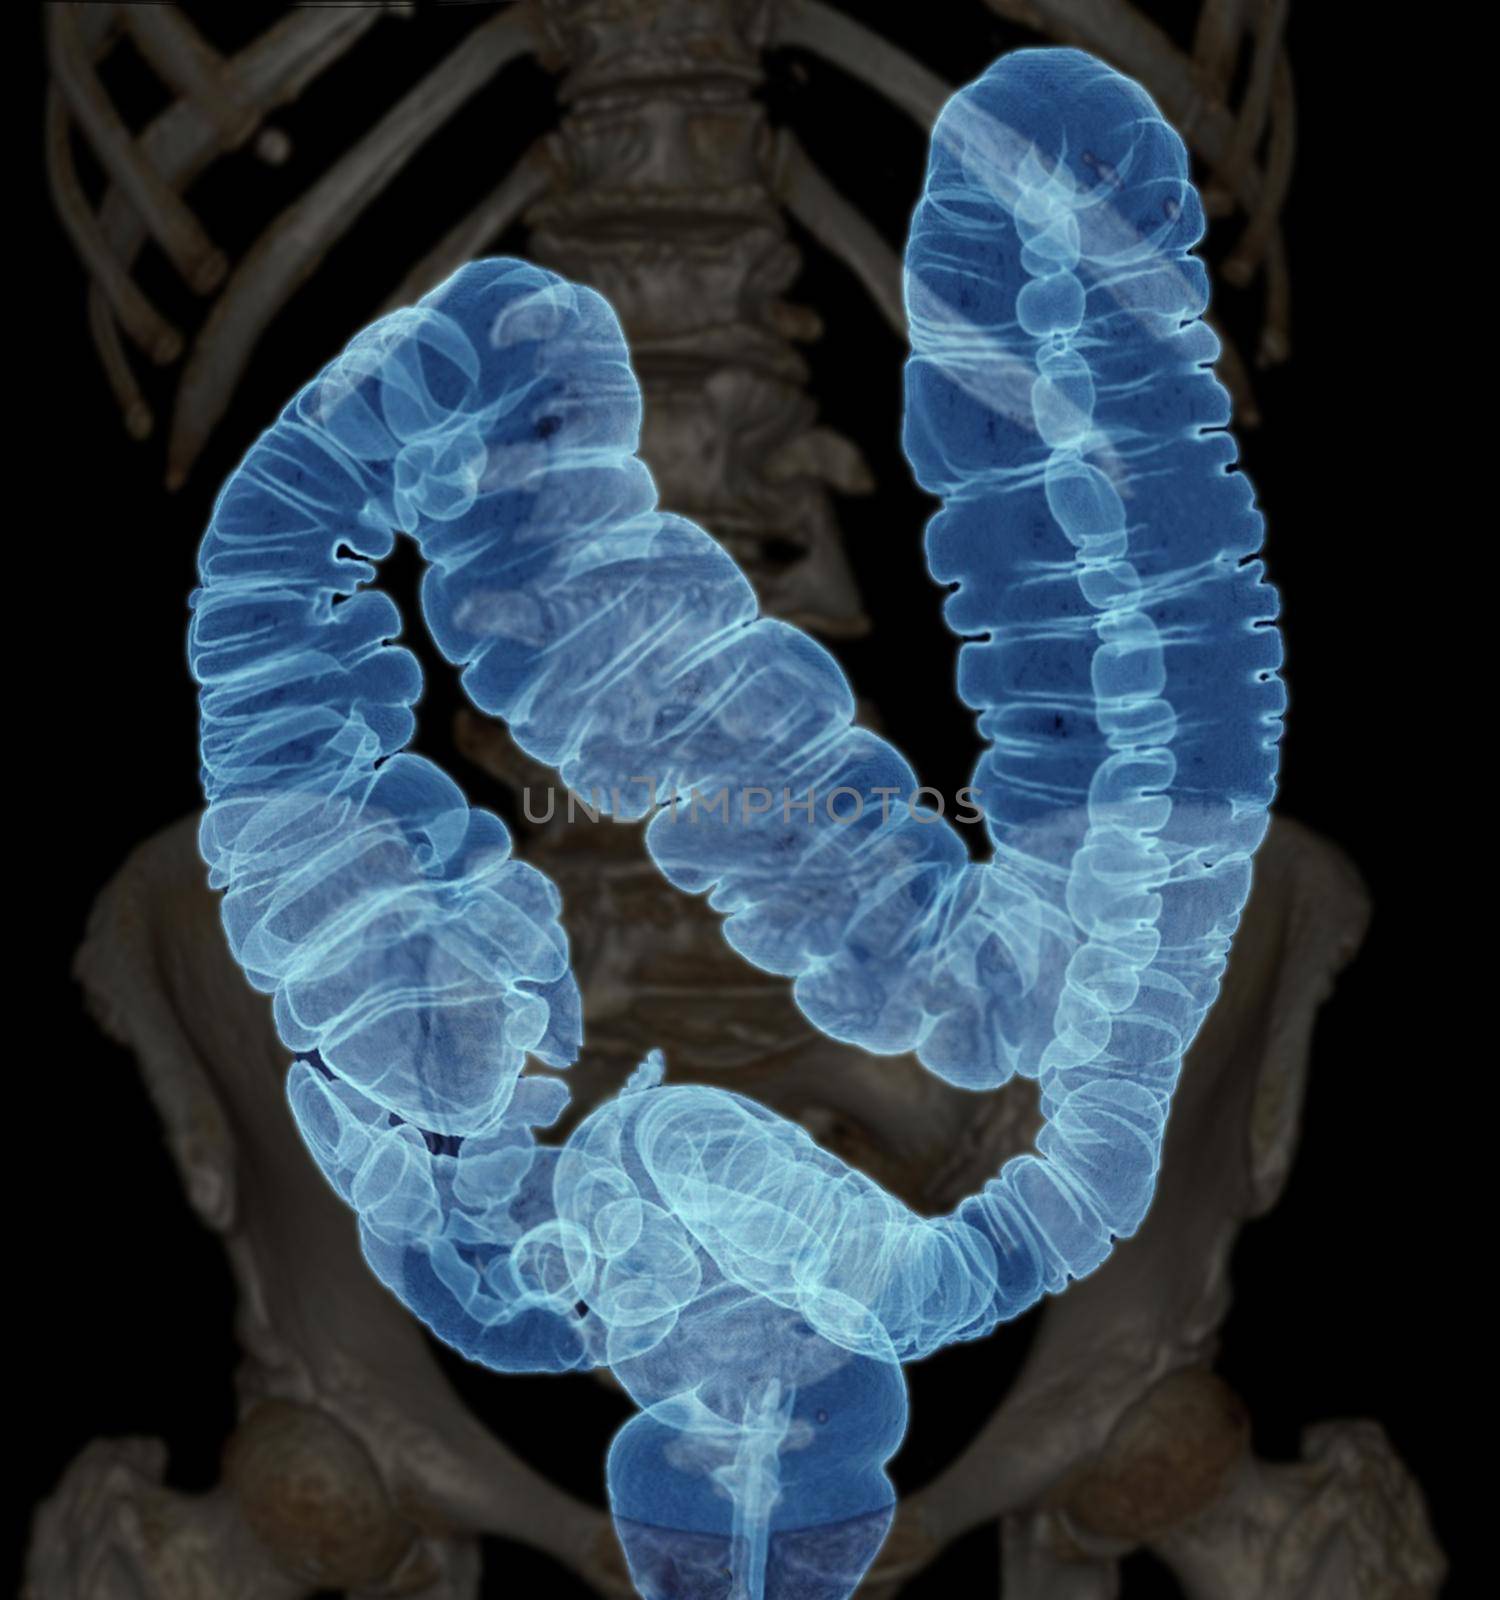 CT colonography or CT Scan of Colon 3D Rendering image AP view showing colon for screening colorectal cancer. Check up Screening Colon Cancer.